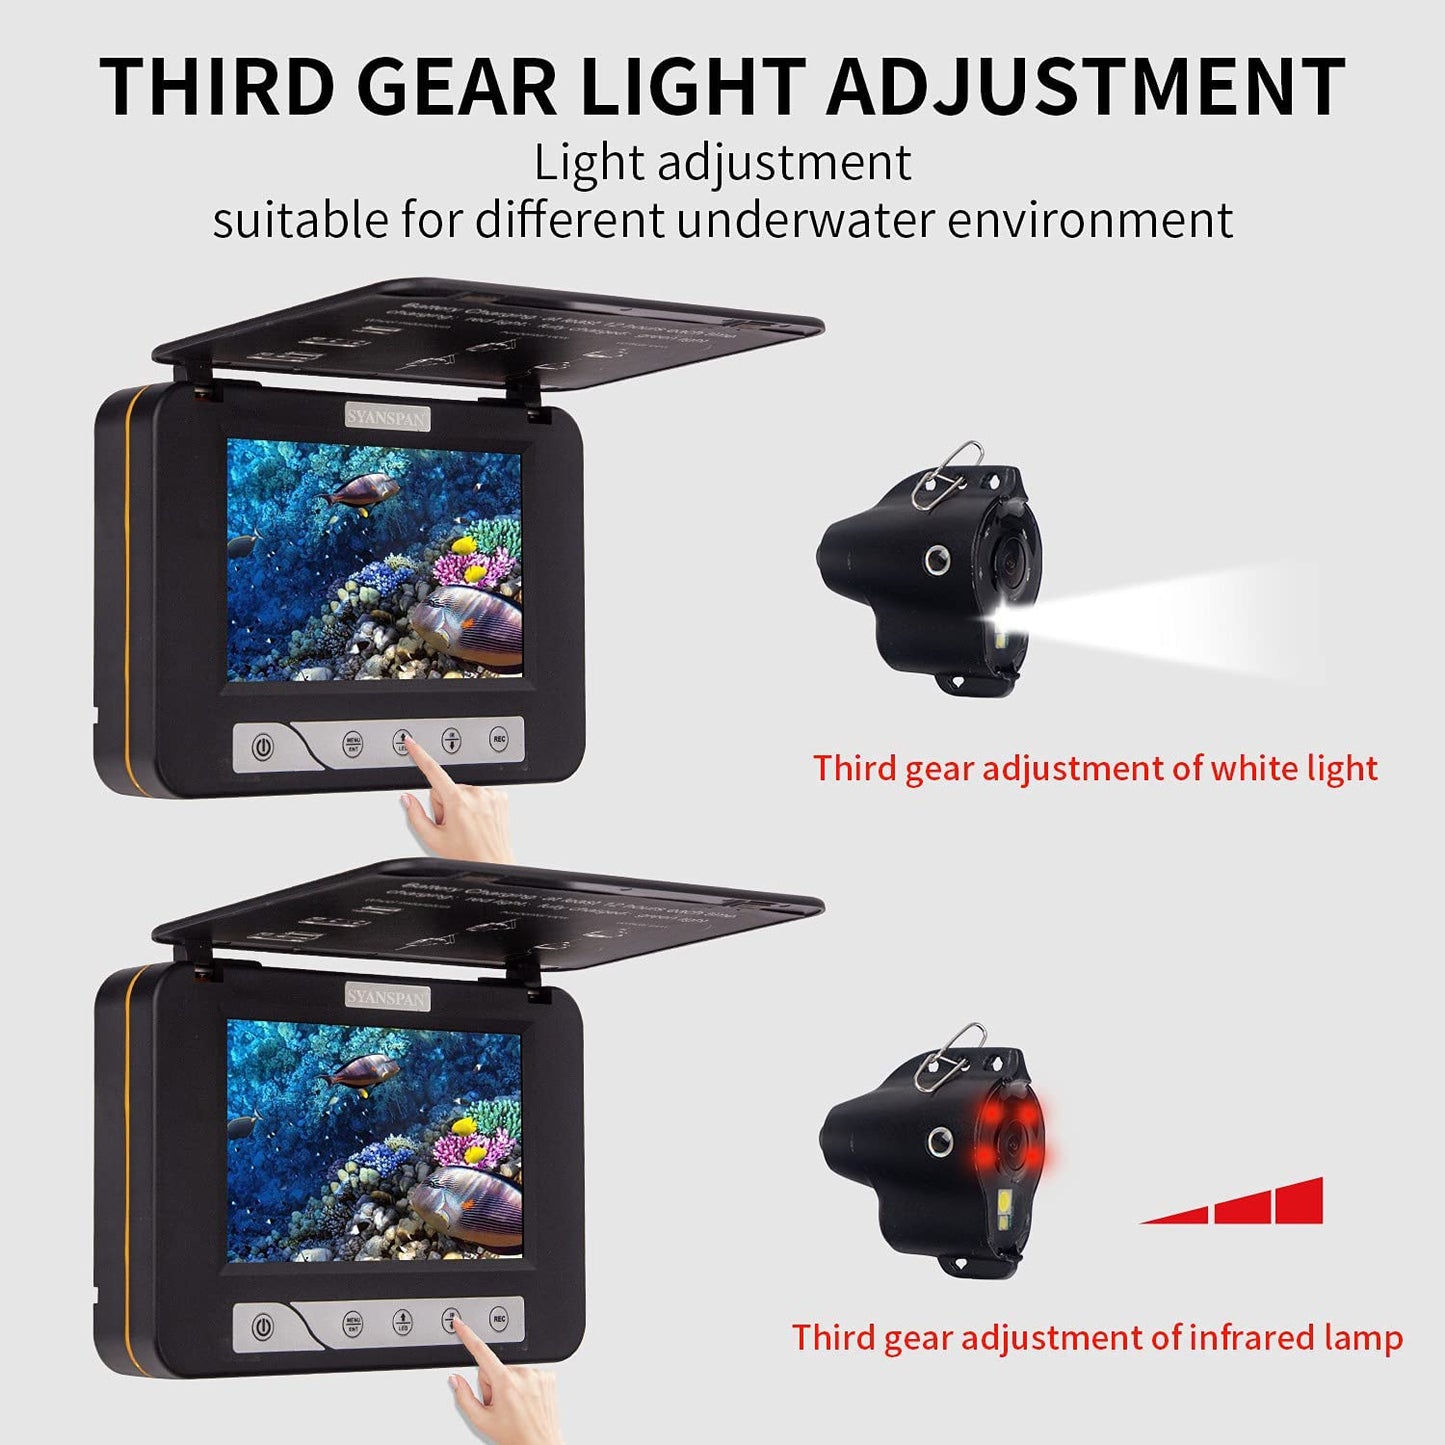 SYANSPAN Video Recording Temperature and Depth Display Fish Finder Underwater Fishing Camera,Hd 5" Video Camera Monitor IR LED for Ice Fishing 15/30M Cable